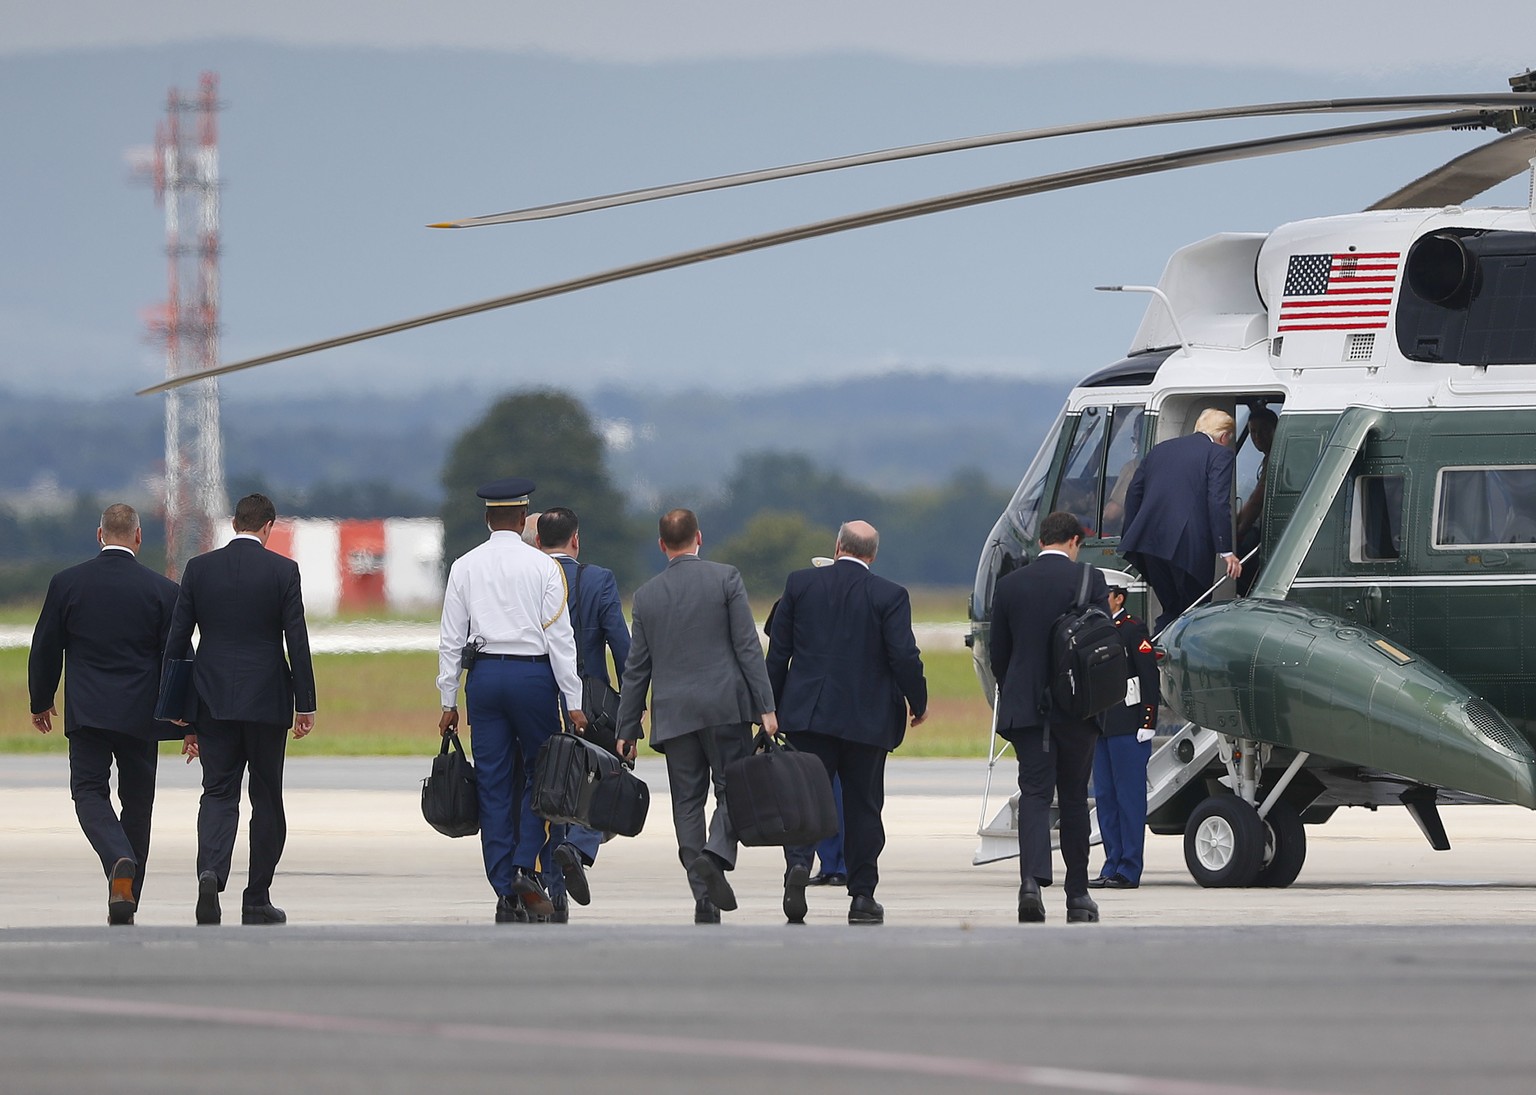 President Donald Trump, right, boards Marine One helicopter, followed by members of his staff at Hagerstown Regional Airport in Hagerstown, Md., Friday, Aug. 18, 2017, en route to nearby Camp David, f ...